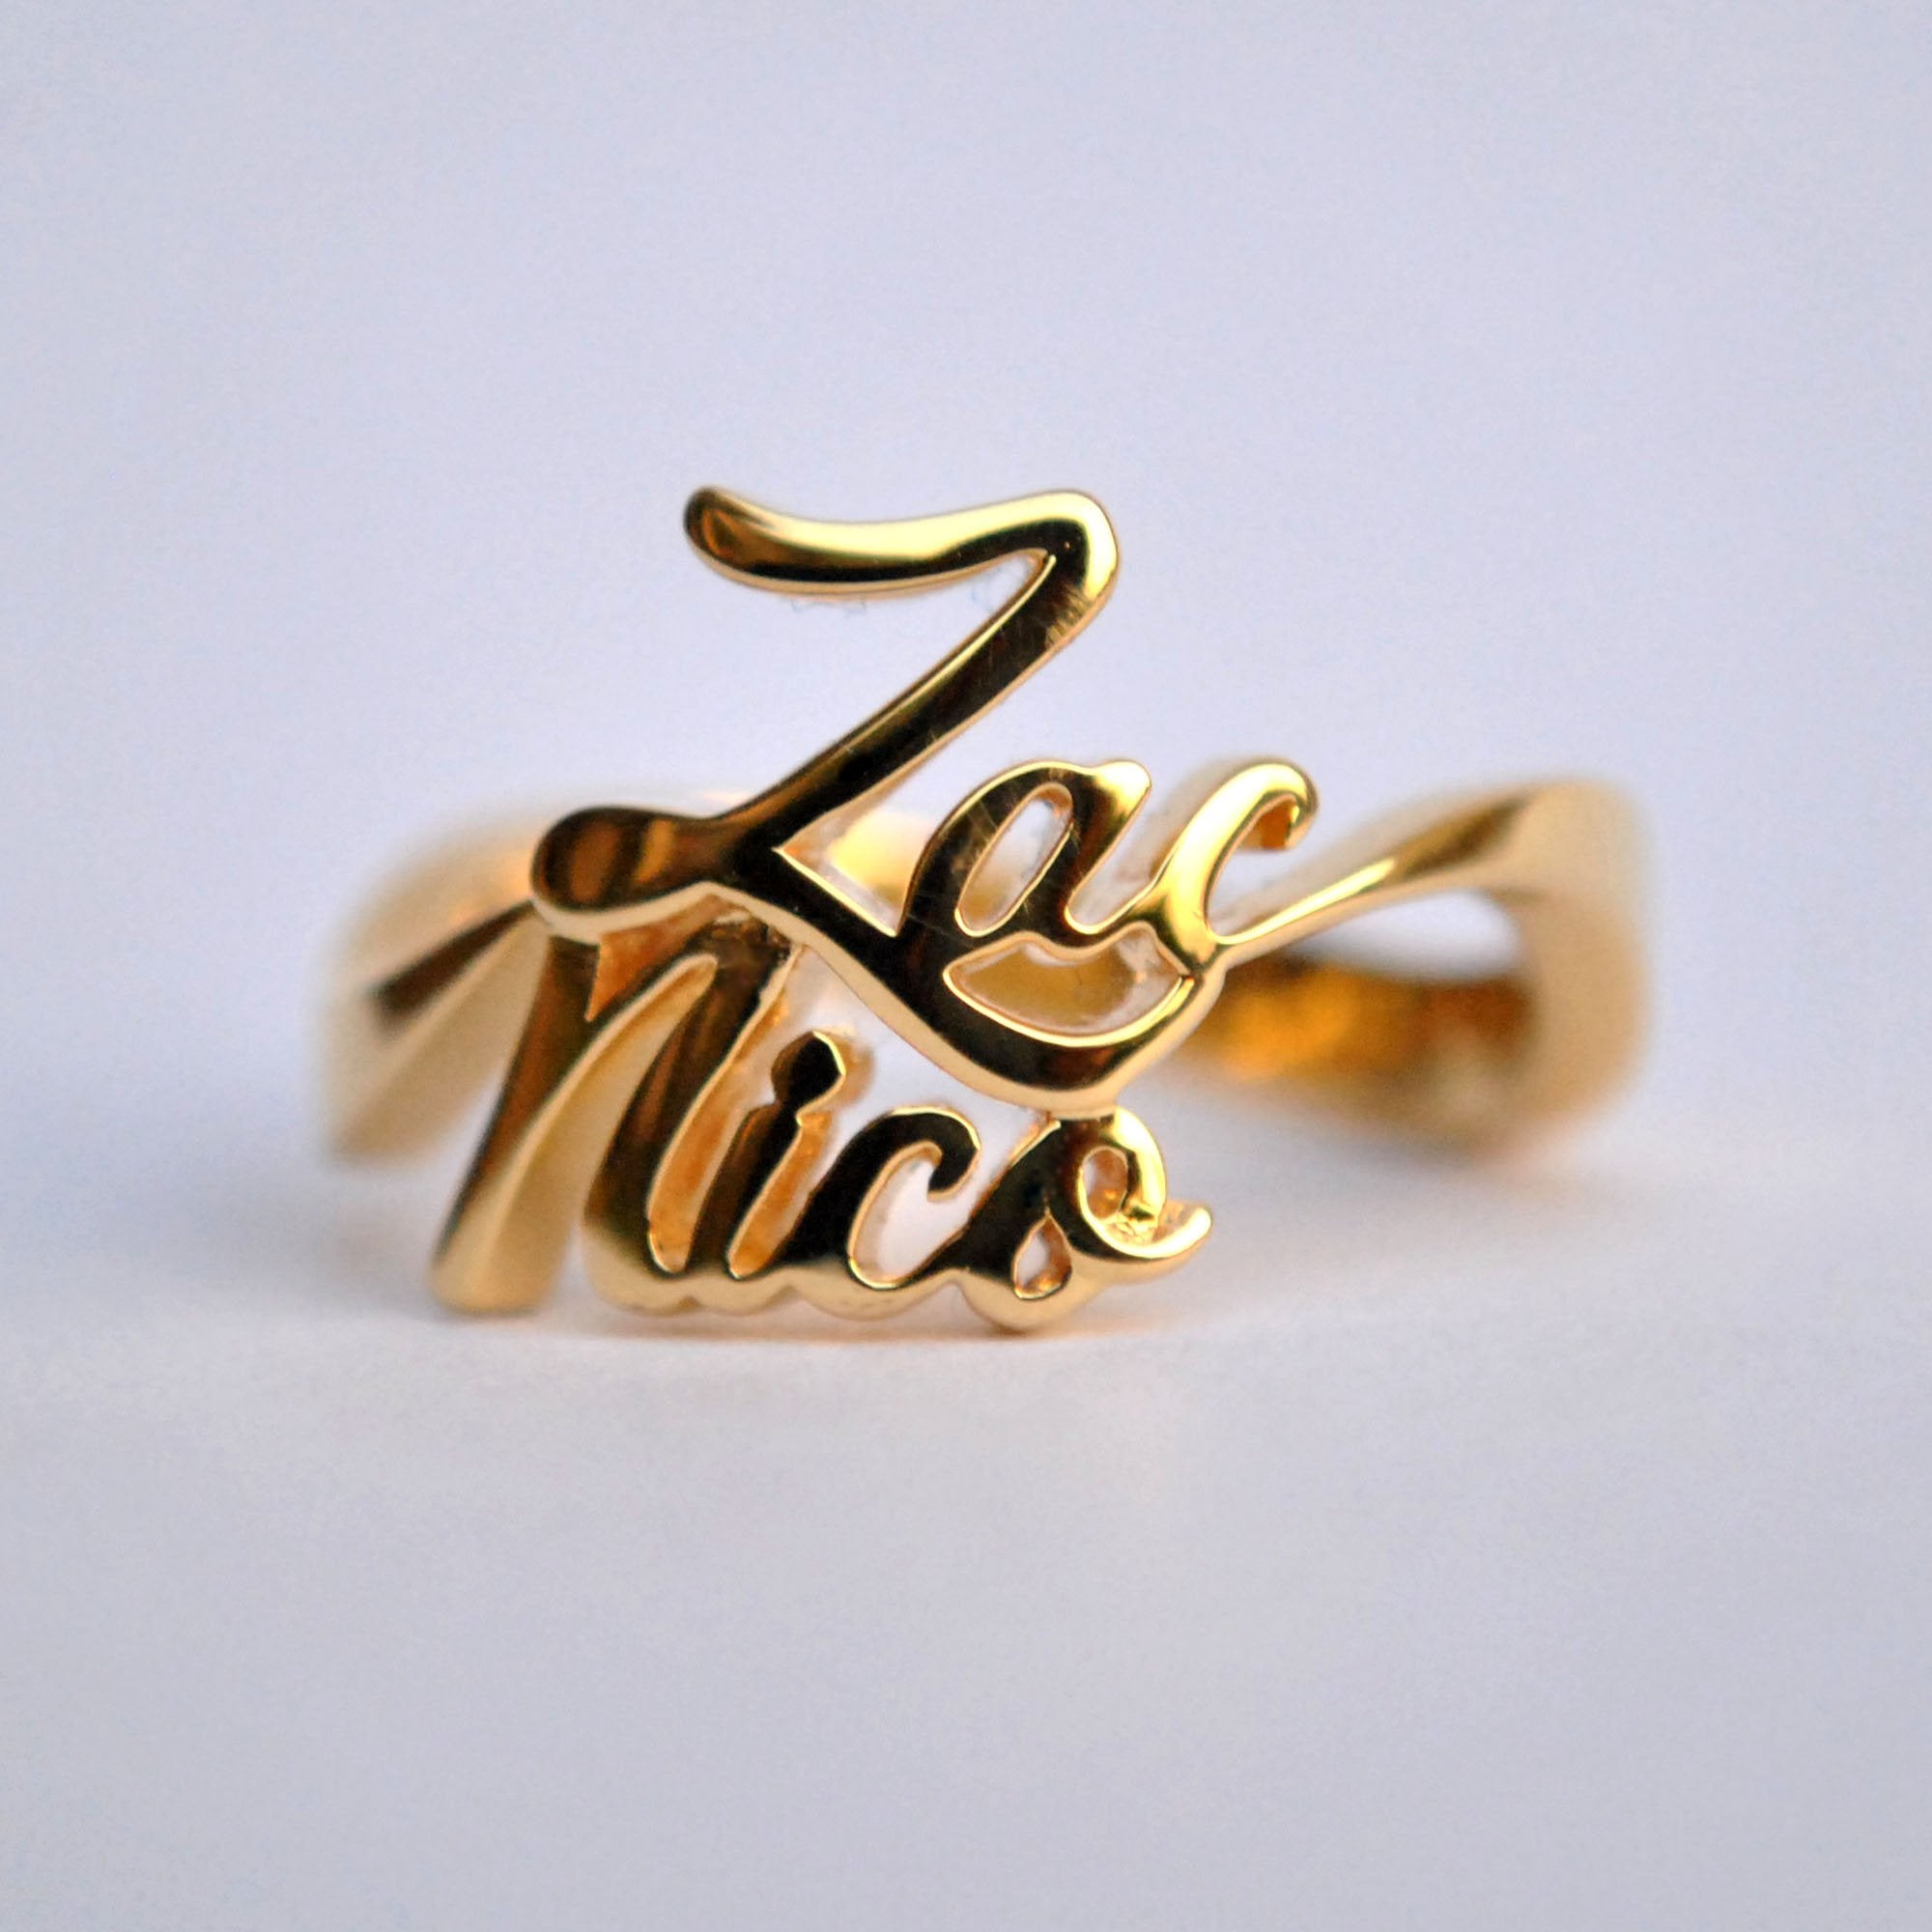 Call my name Ring - Noush Jewelry